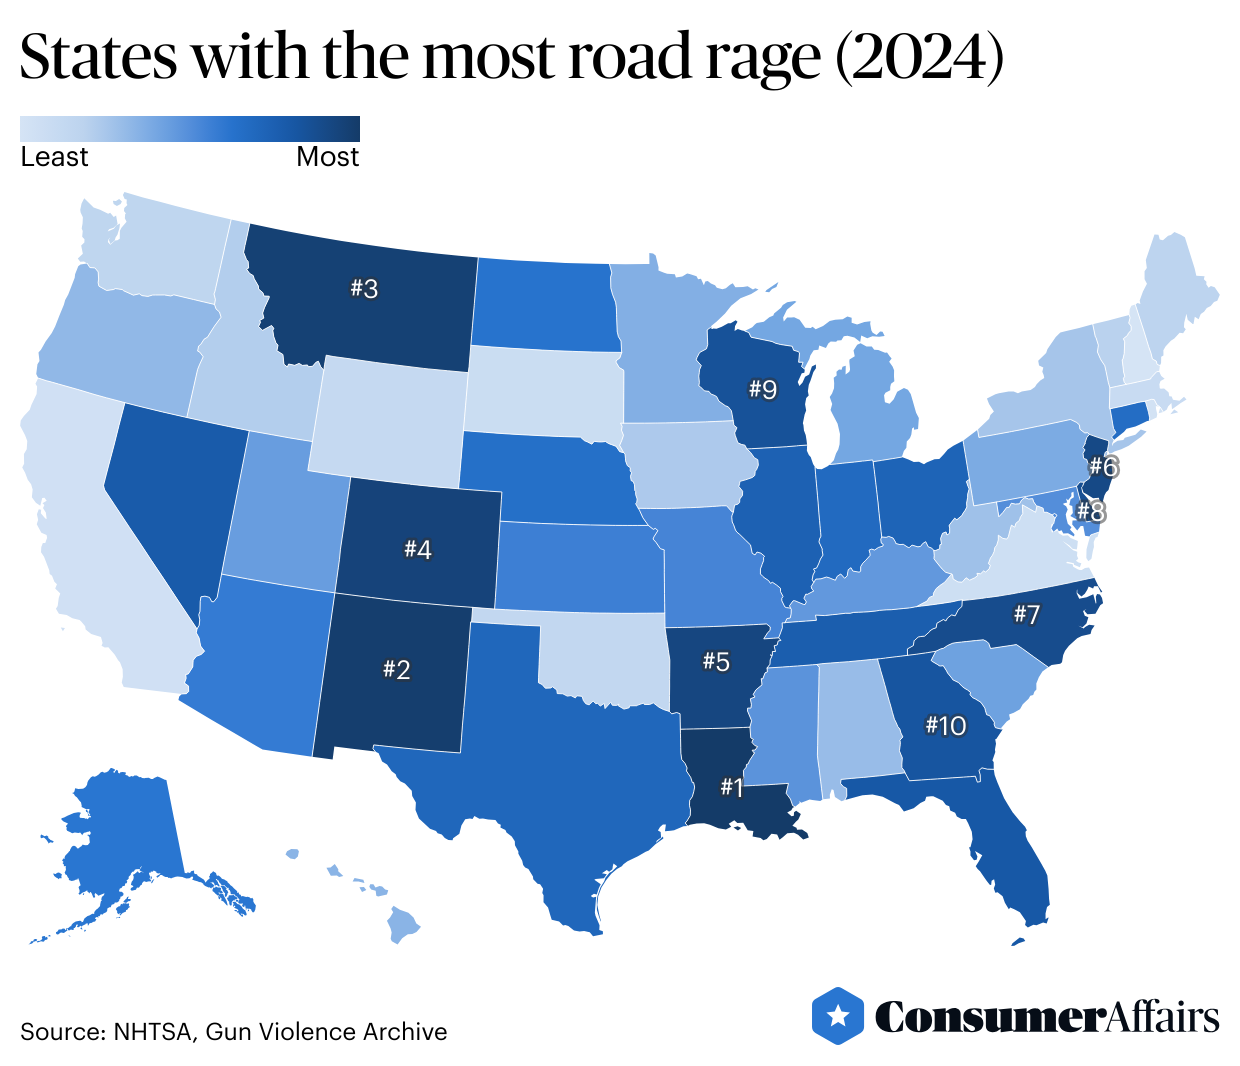 Heatmap showing “States with the most road rage (2024)”.